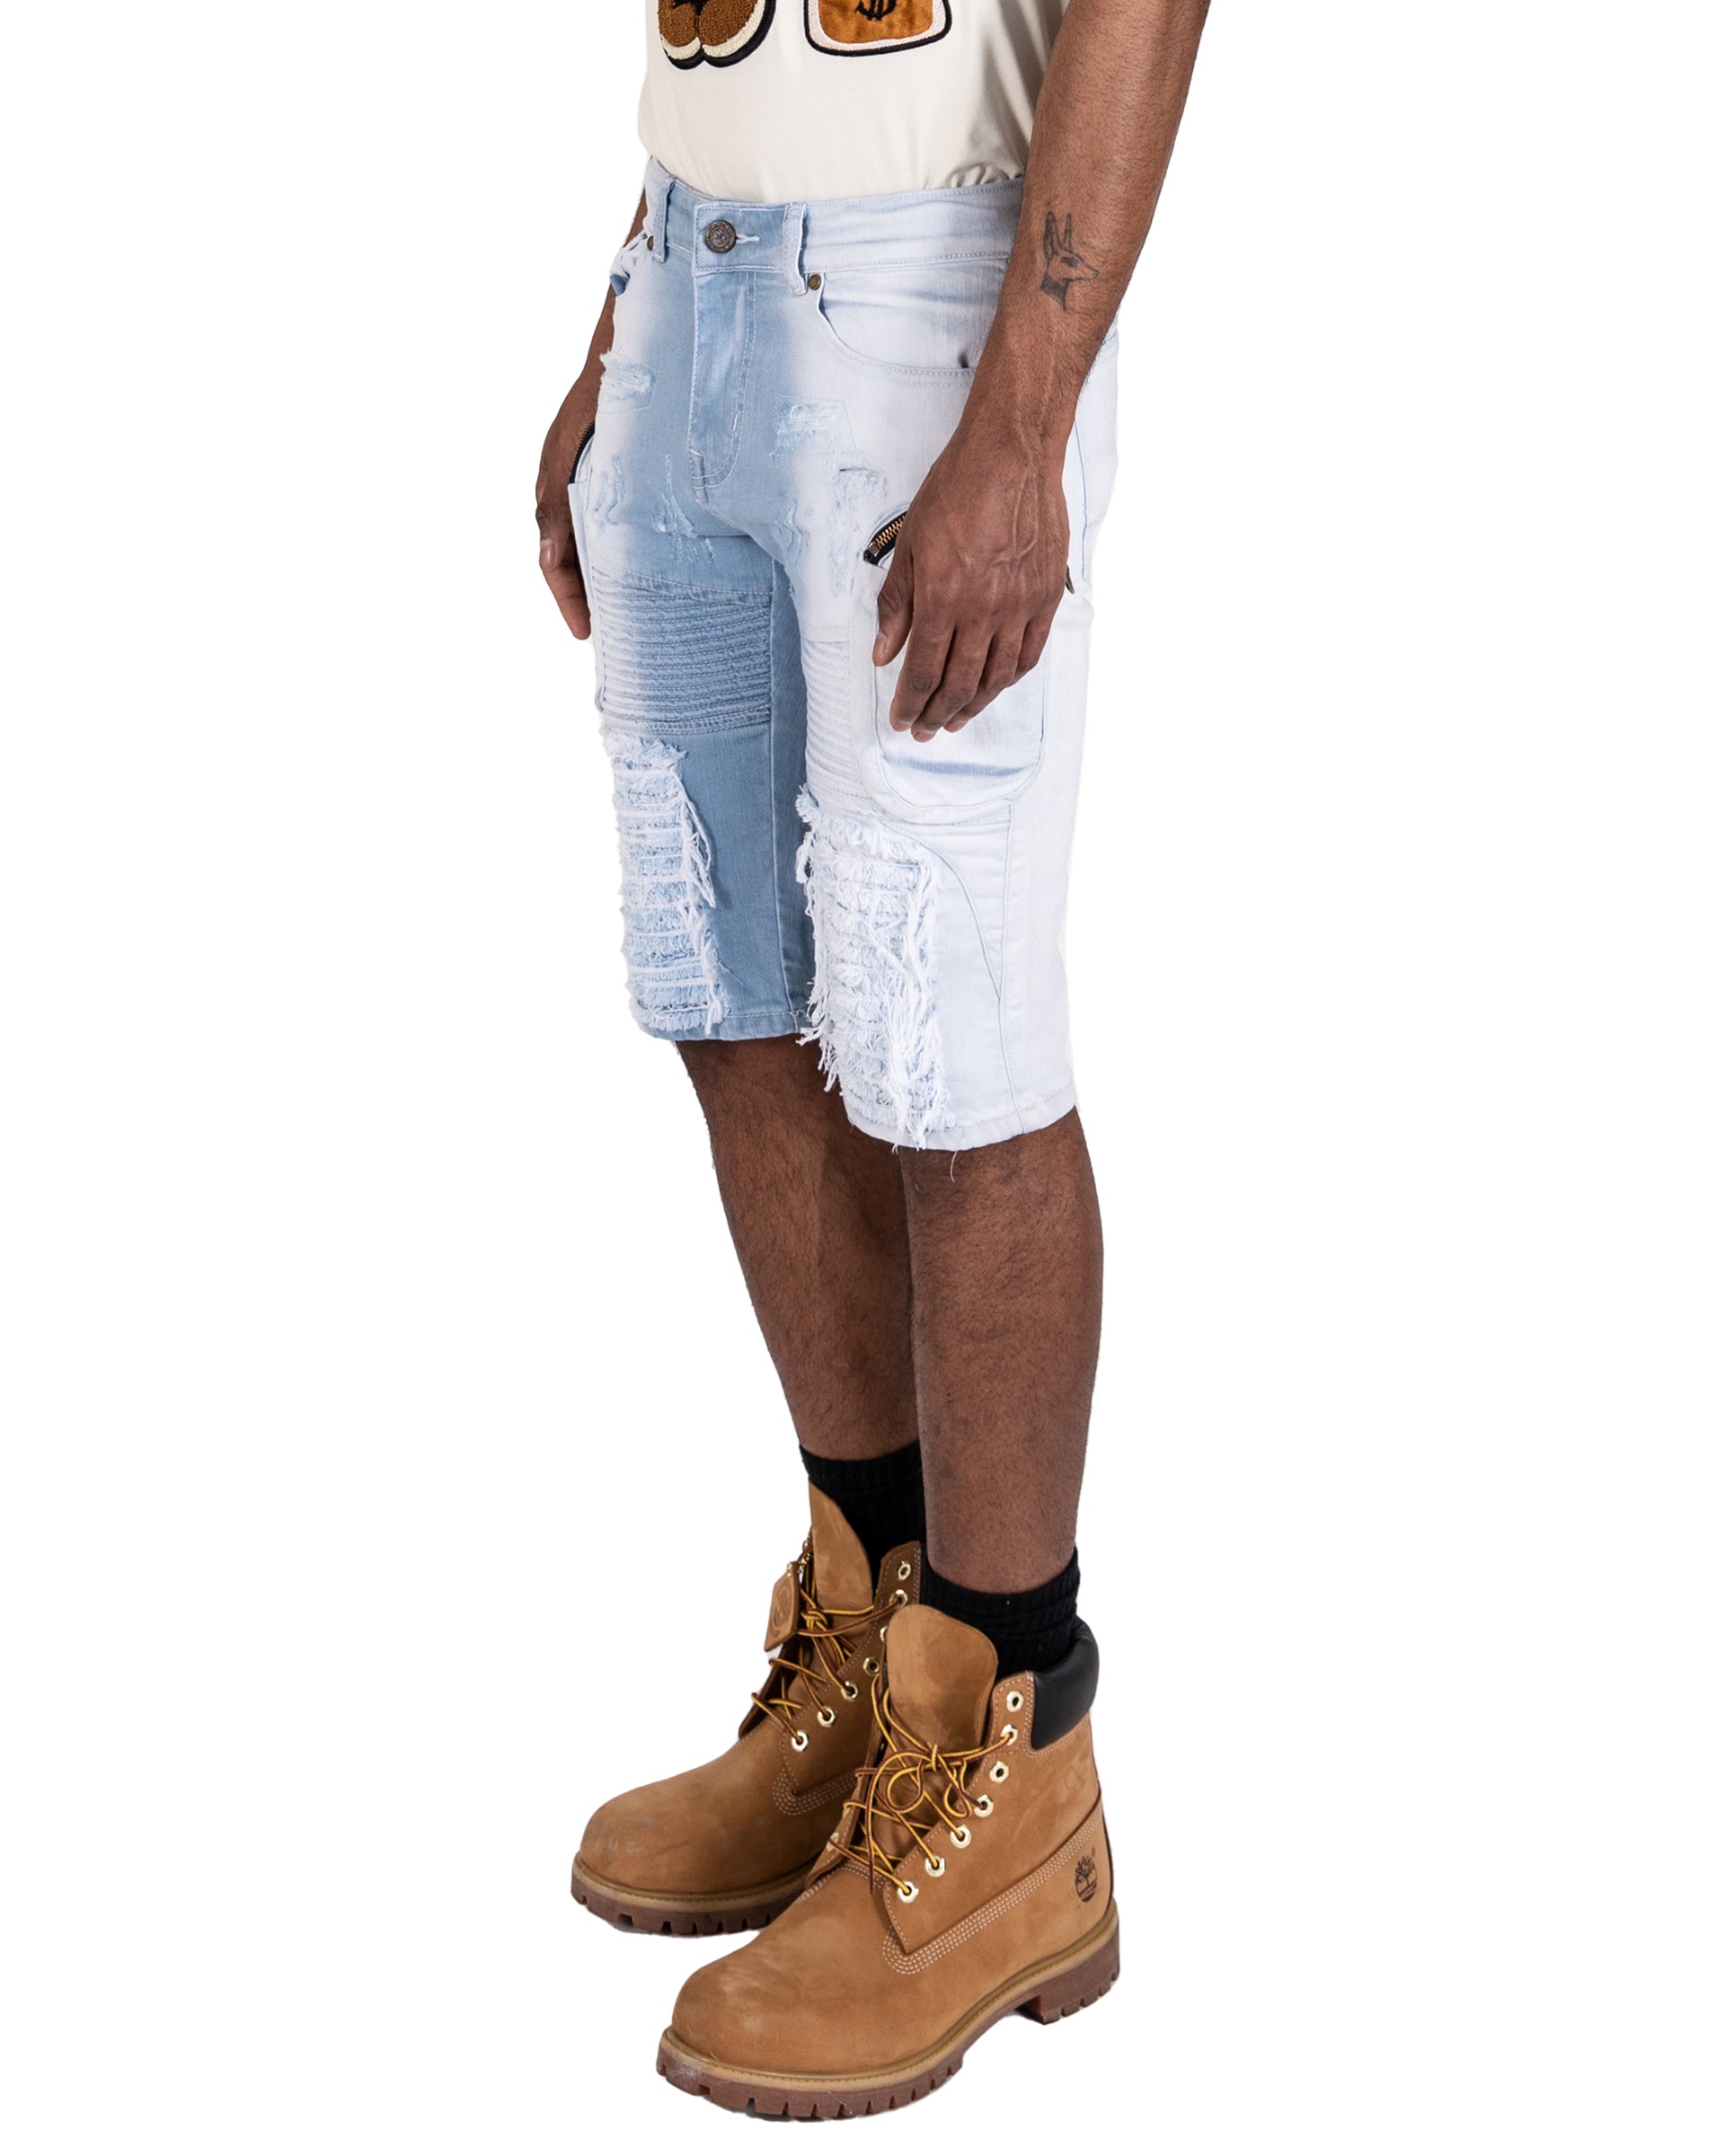 LAKE | Men's Slim Fit Frayed Cutoff Destroyed Ripped Distressed Knee Length Denim Jean Shorts with Cargo Pockets in Light Blue Wash